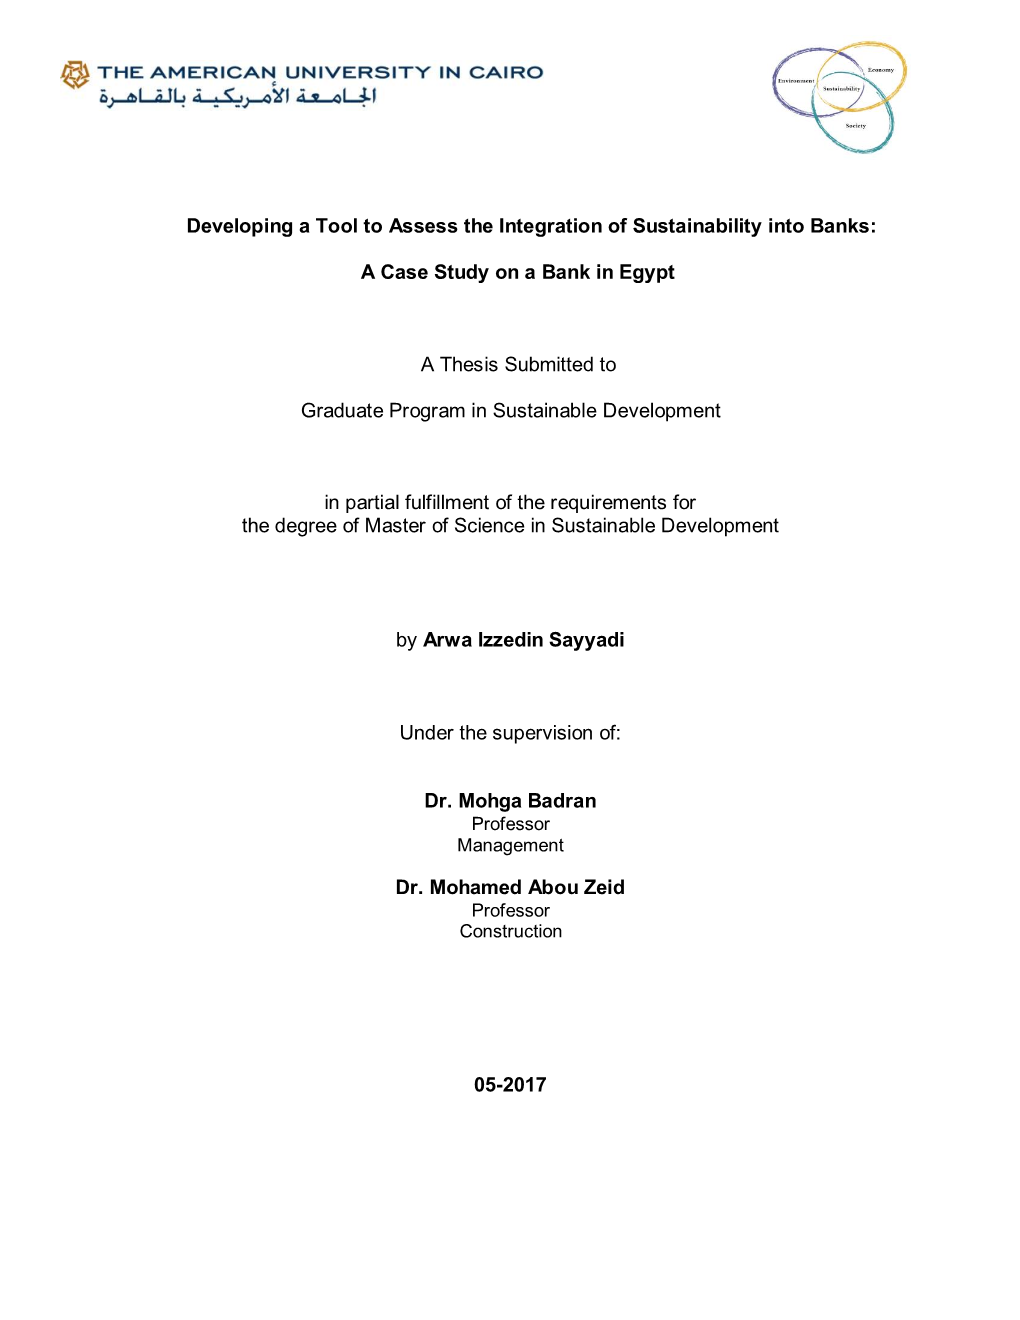 Developing a Tool to Assess the Integration of Sustainability Into Banks: a Case Study on a Bank in Egypt a Thesis Submitted To